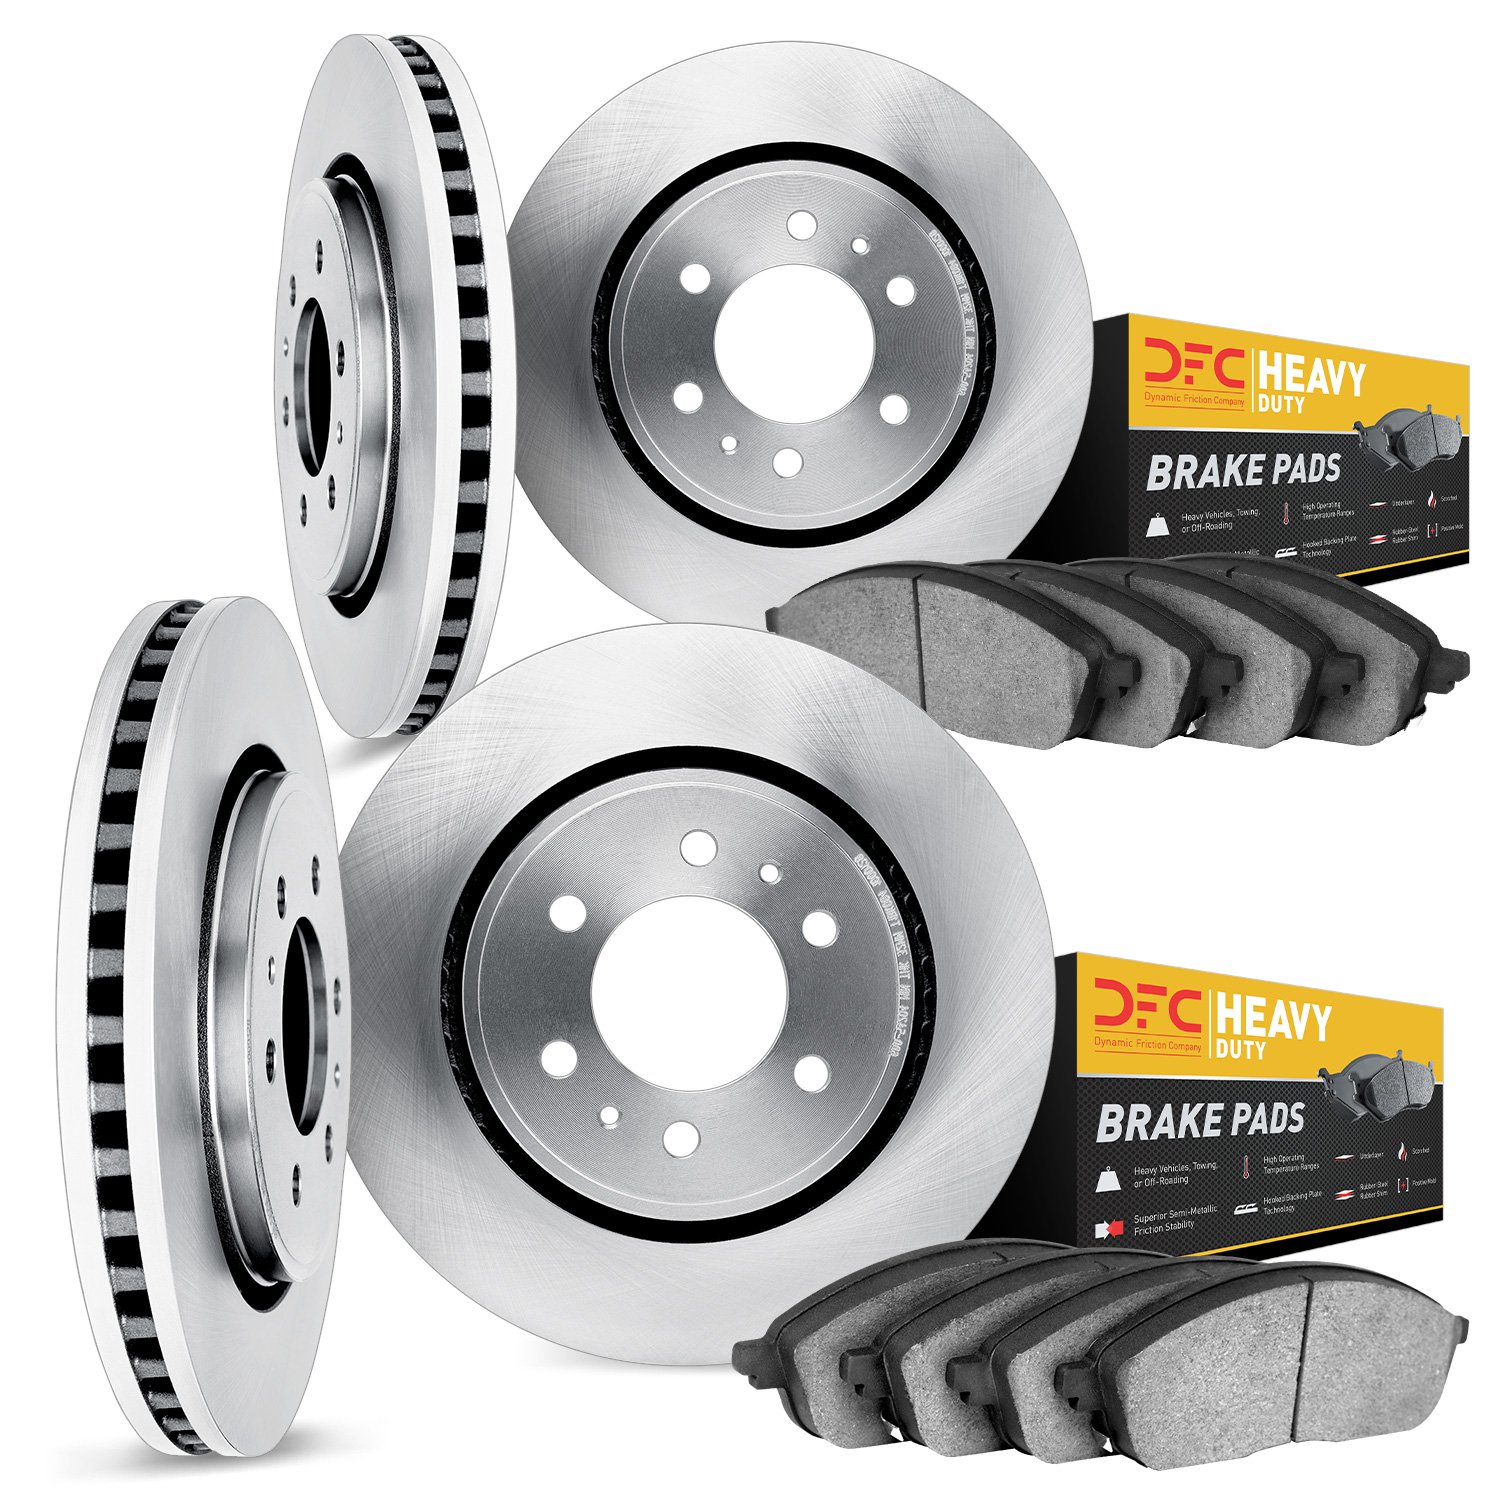 6204-48339 Brake Rotors w/Heavy-Duty Brake Pads Kit, 2009-2014 GM, Position: Front and Rear